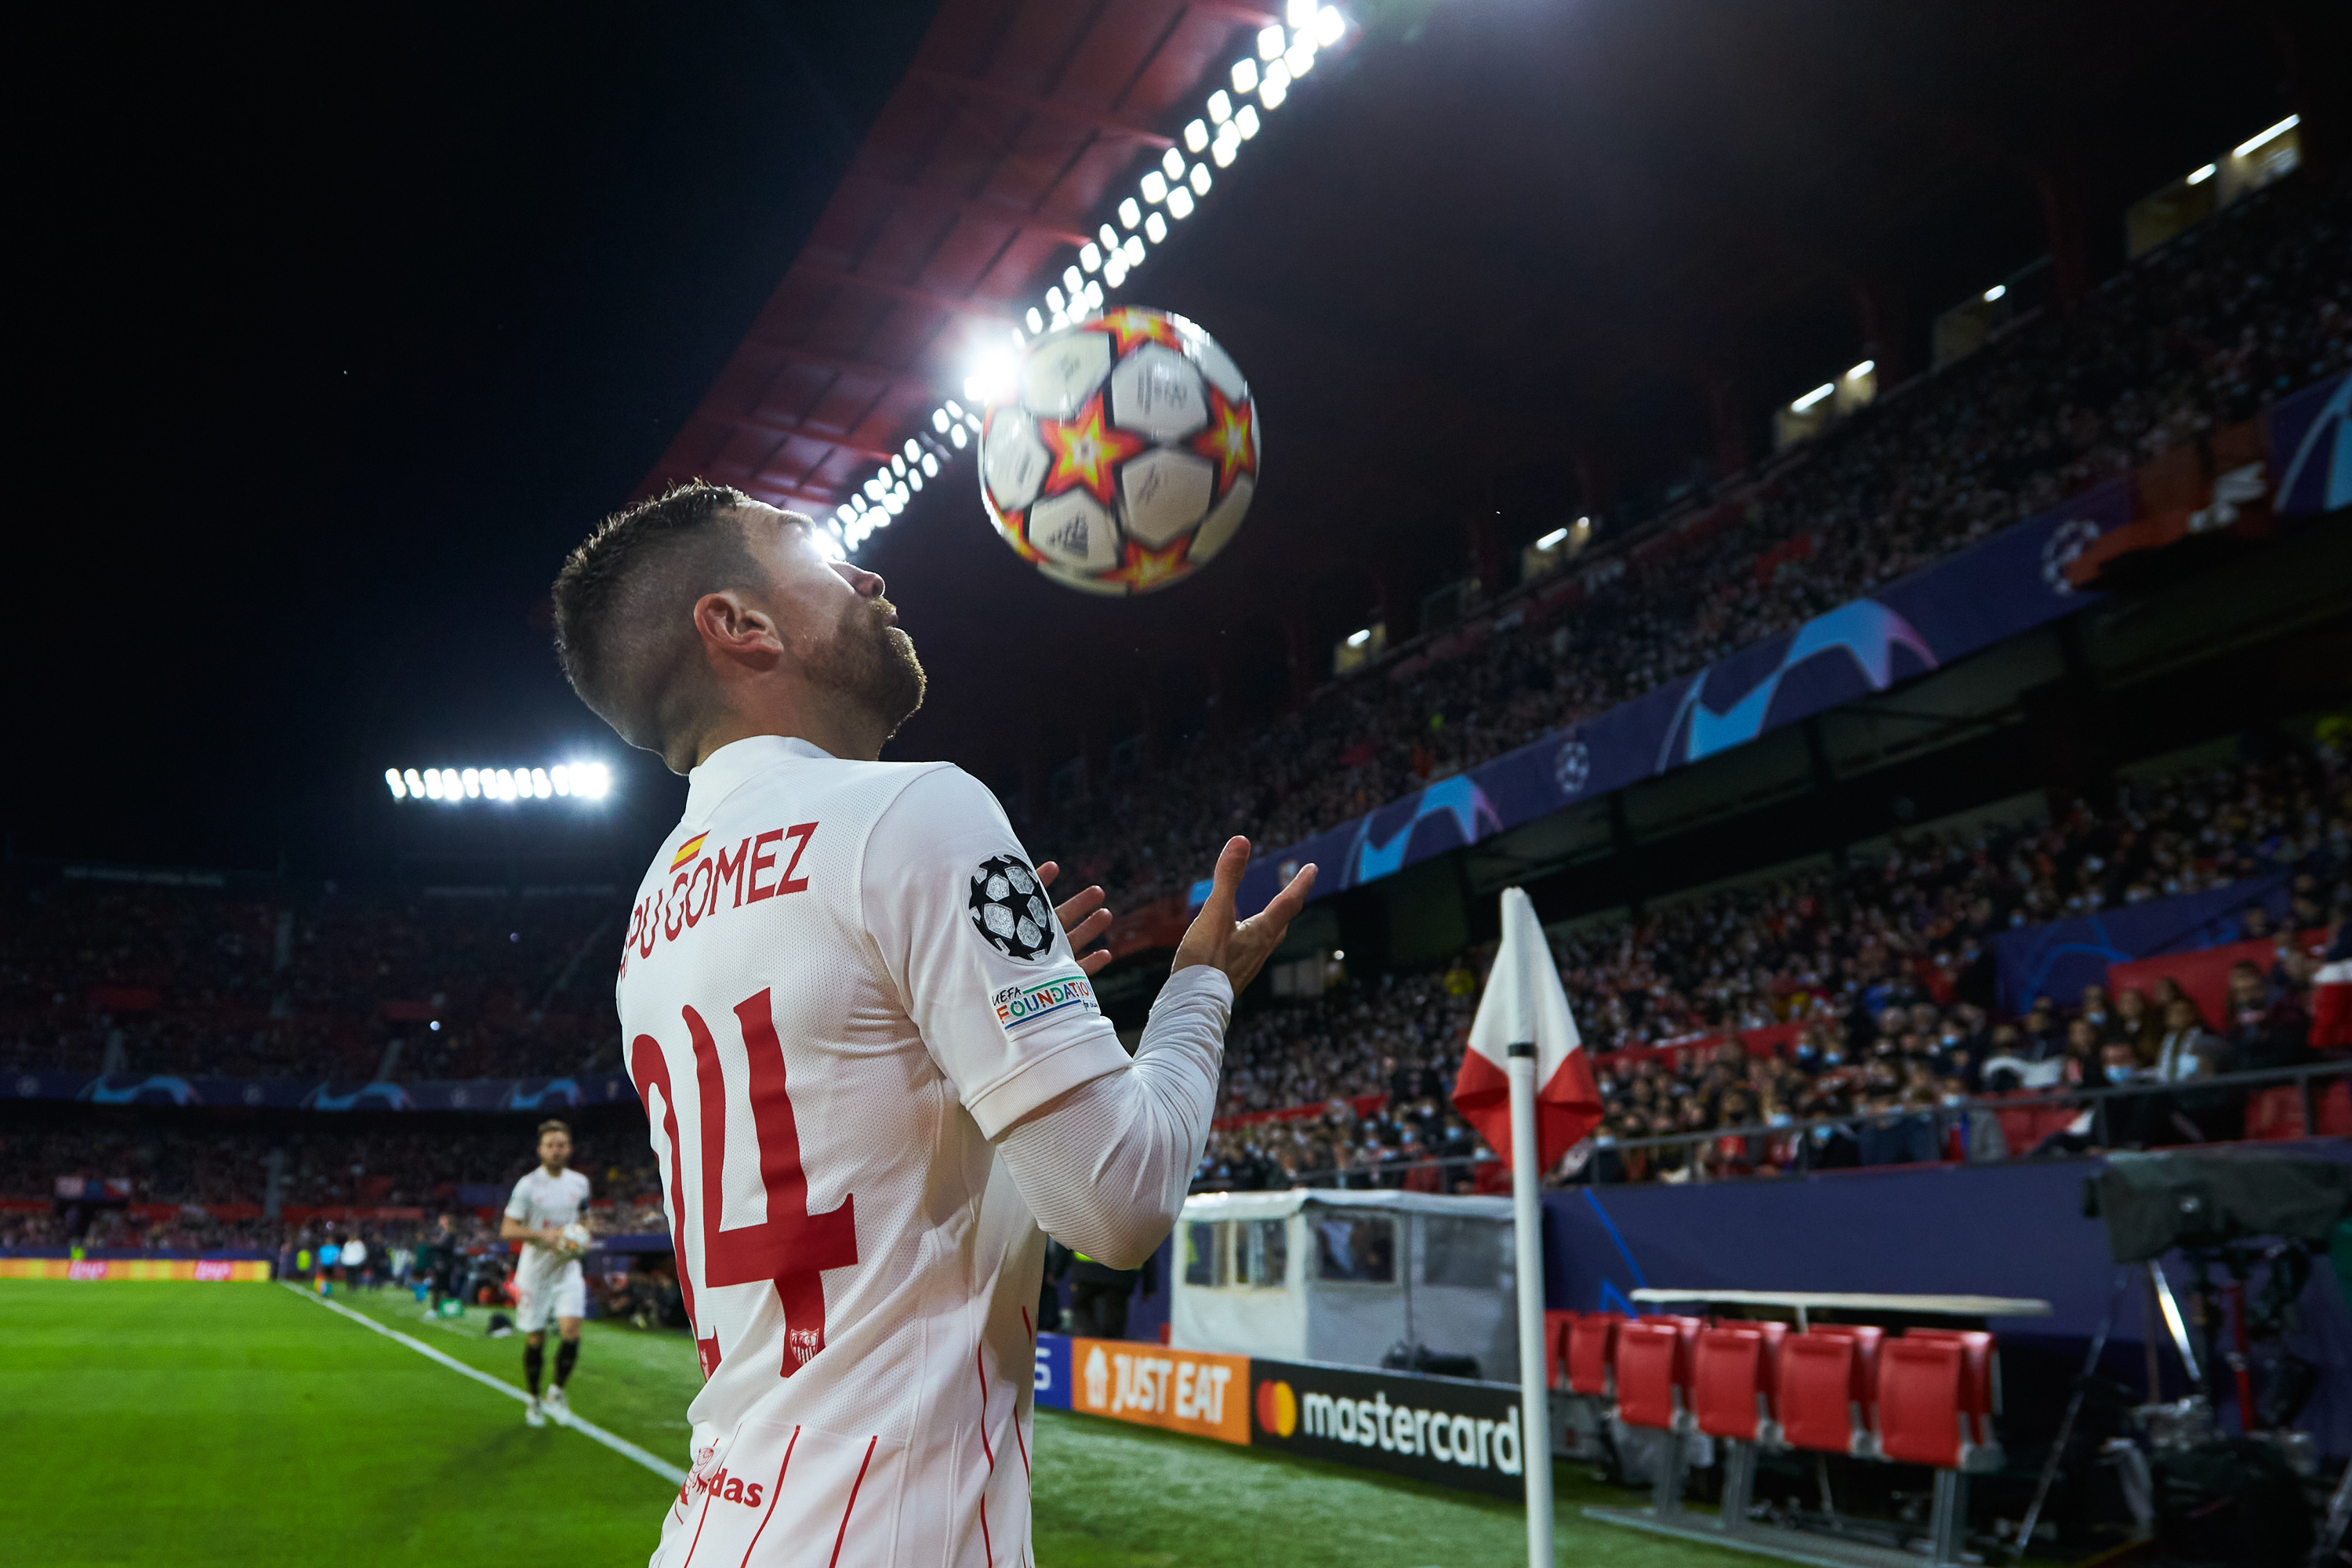 Alexander Darius "Papuan" Gómez of Sevilla in action during the UEFA Champions League, Group G football match played between Sevilla FC and VFL Wolfsburg at Ramón Sánchez-Pizjuan Stadium on November 23, 2021, in Seville, Spain.